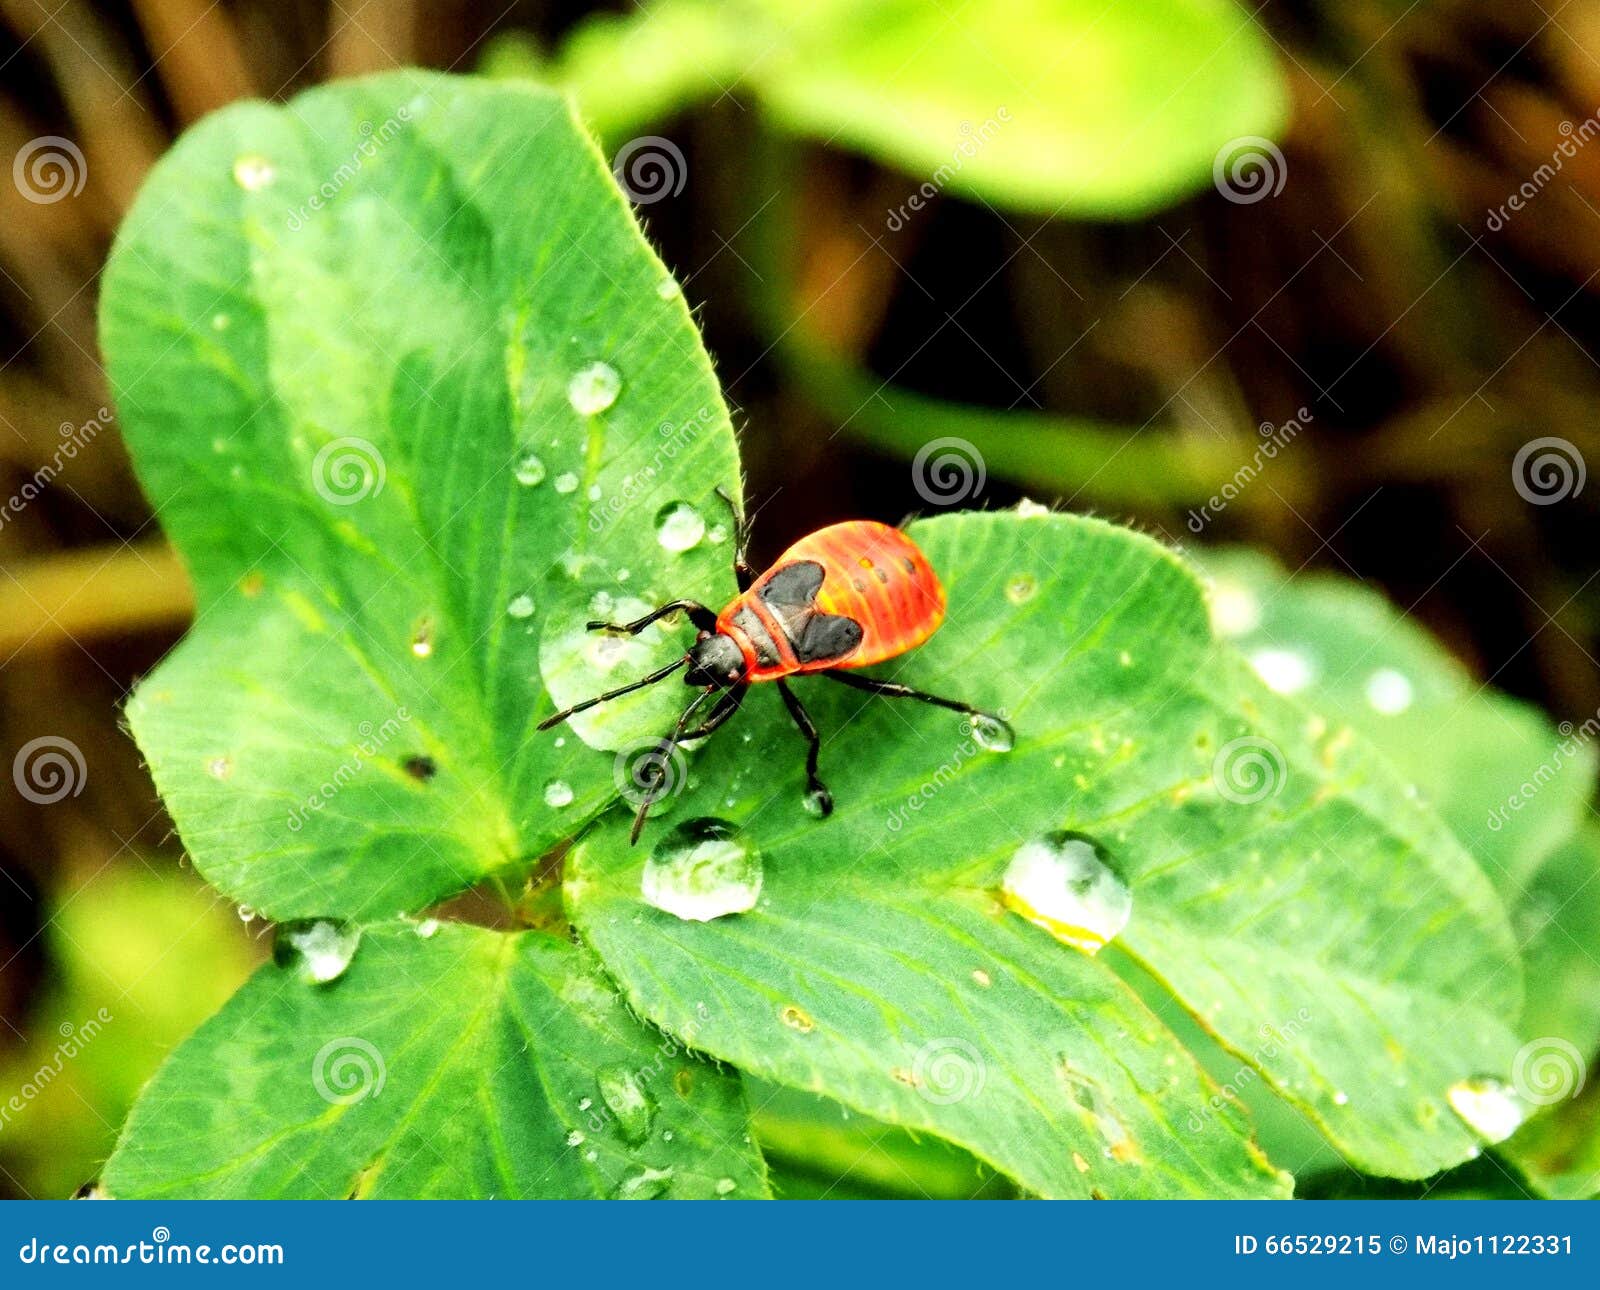 Bug On Wet Clover Stock Image Image Of Plant Storm 66529215